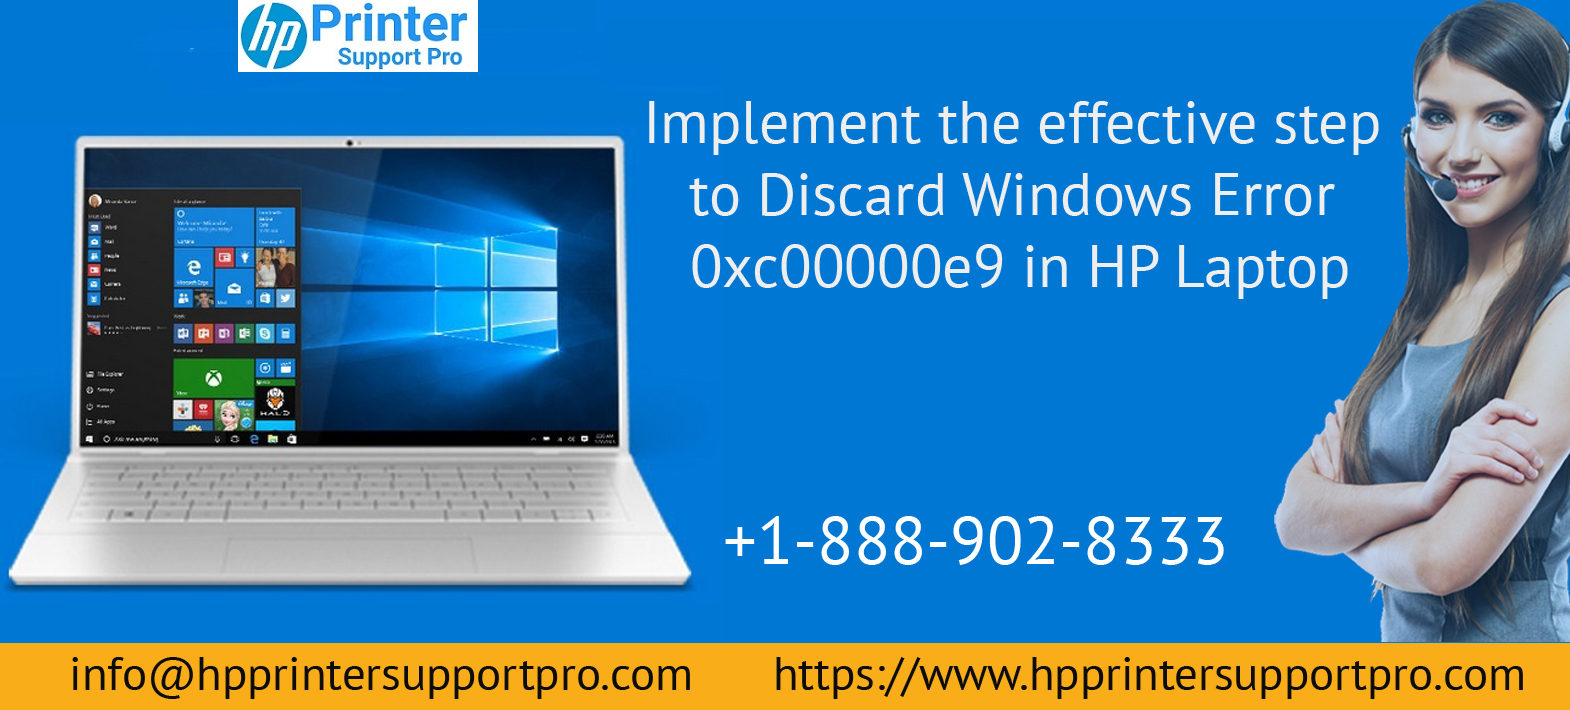 Implement The Effective Step To Discard Windows Error 0xc00000e9 In HP Laptop